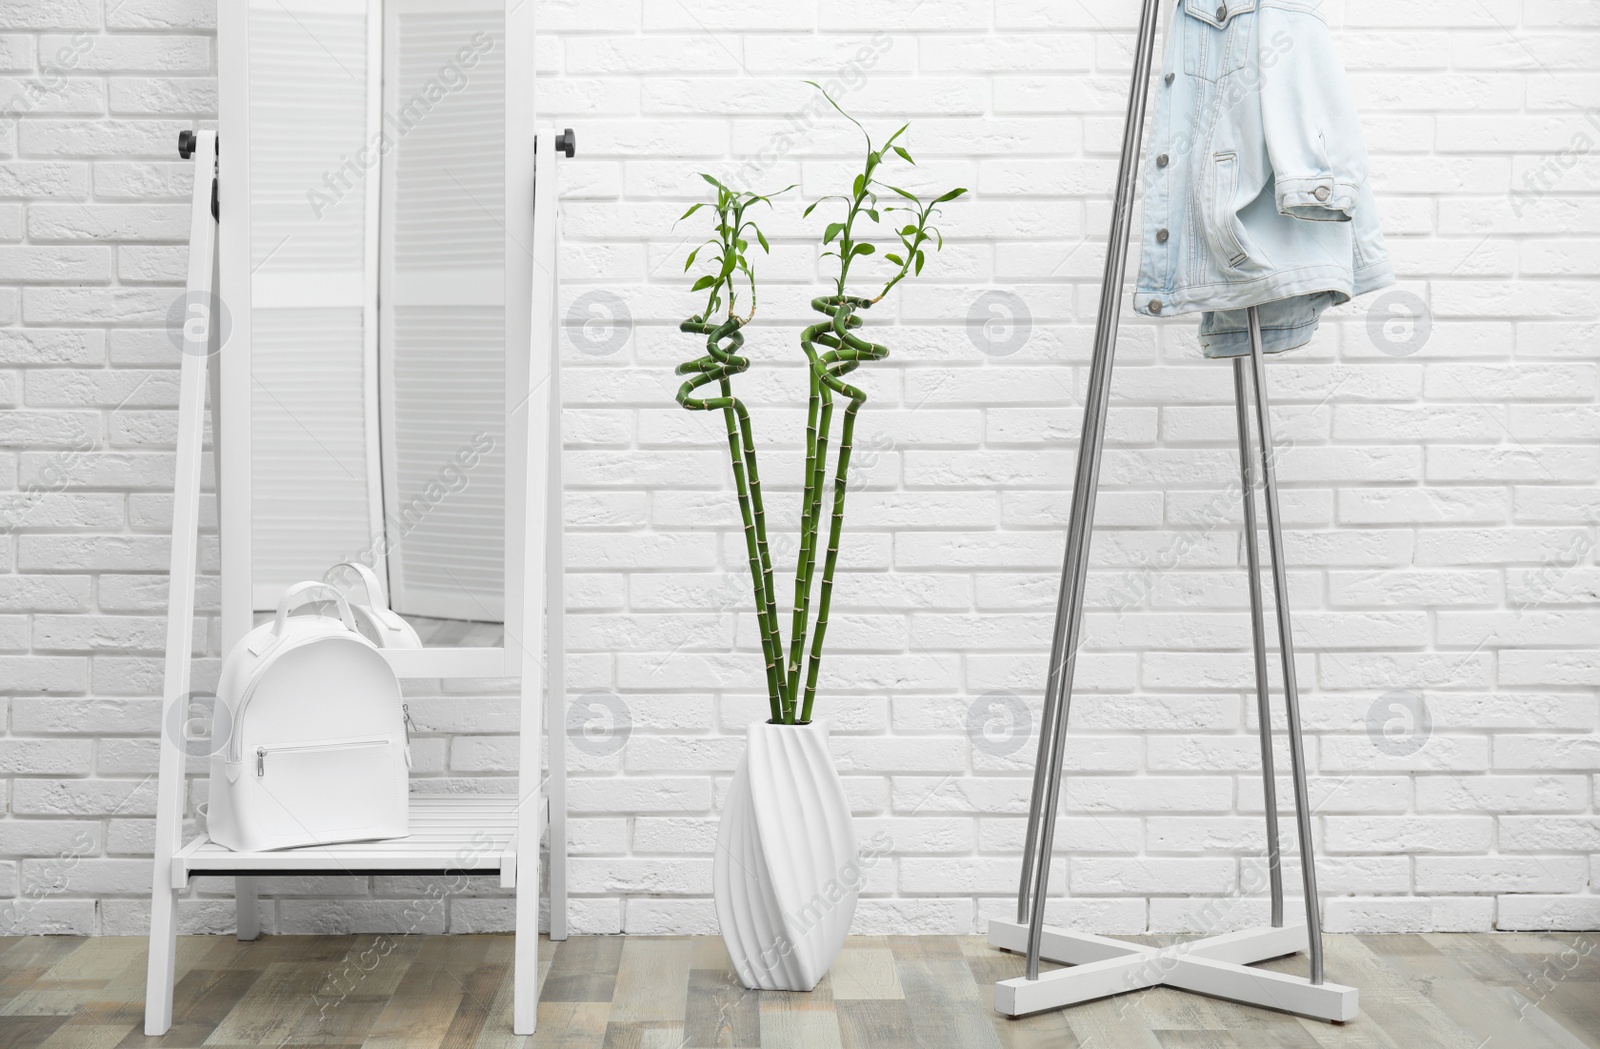 Photo of Vase with green bamboo stems, mirror and rack on floor near white brick wall in room. Interior design